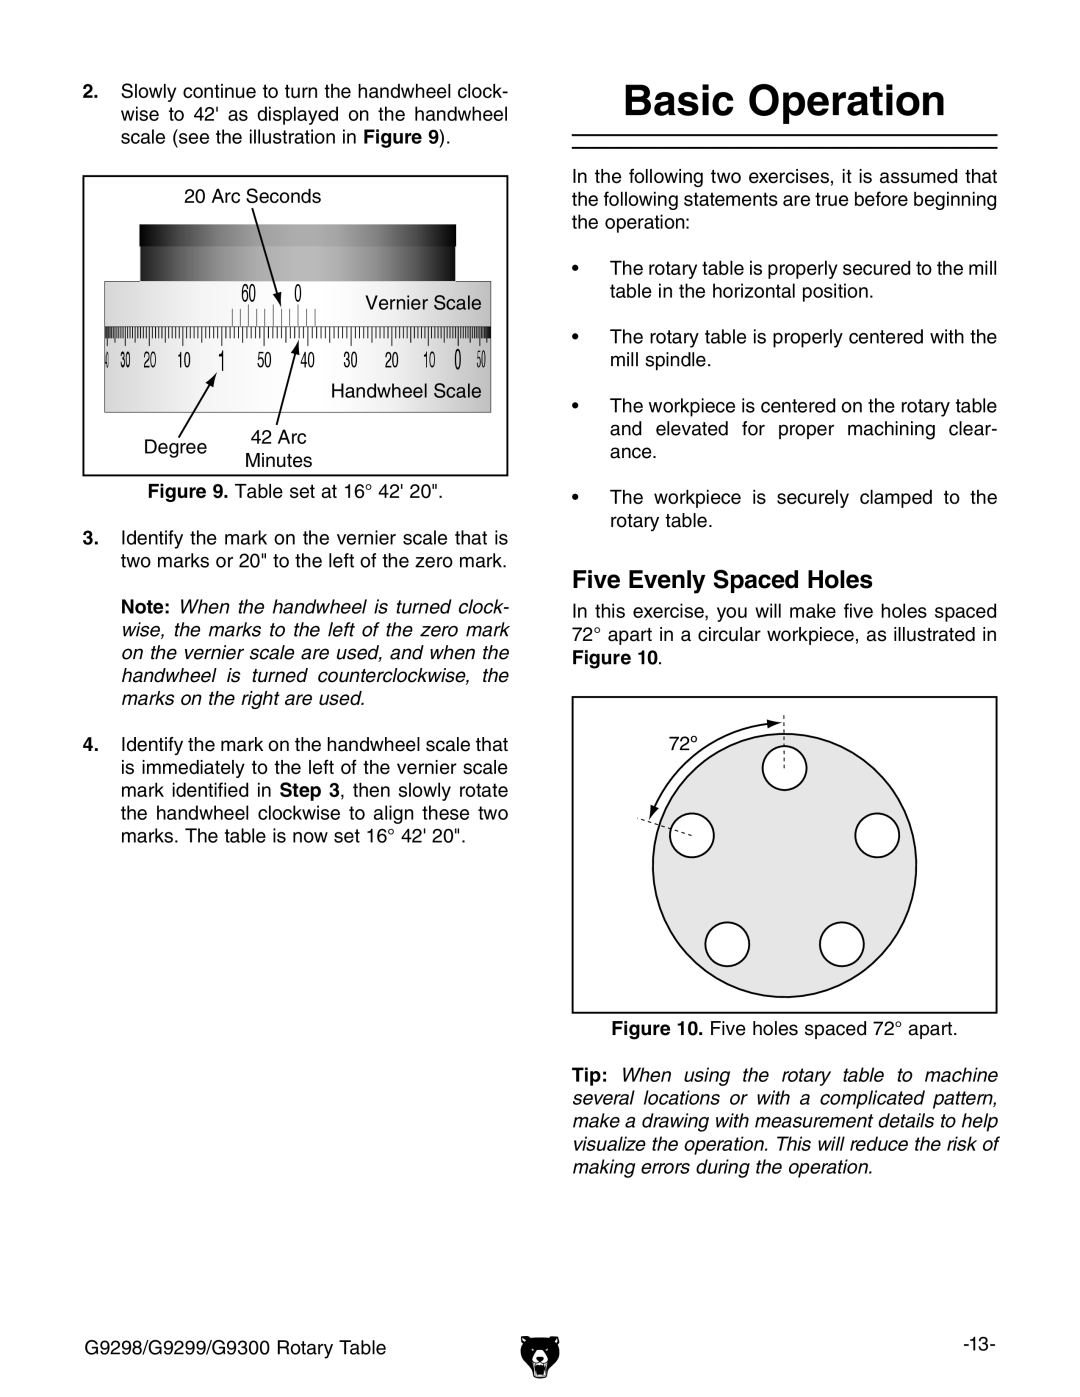 Grizzly G9298 owner manual Basic Operation, Five Evenly Spaced Holes 